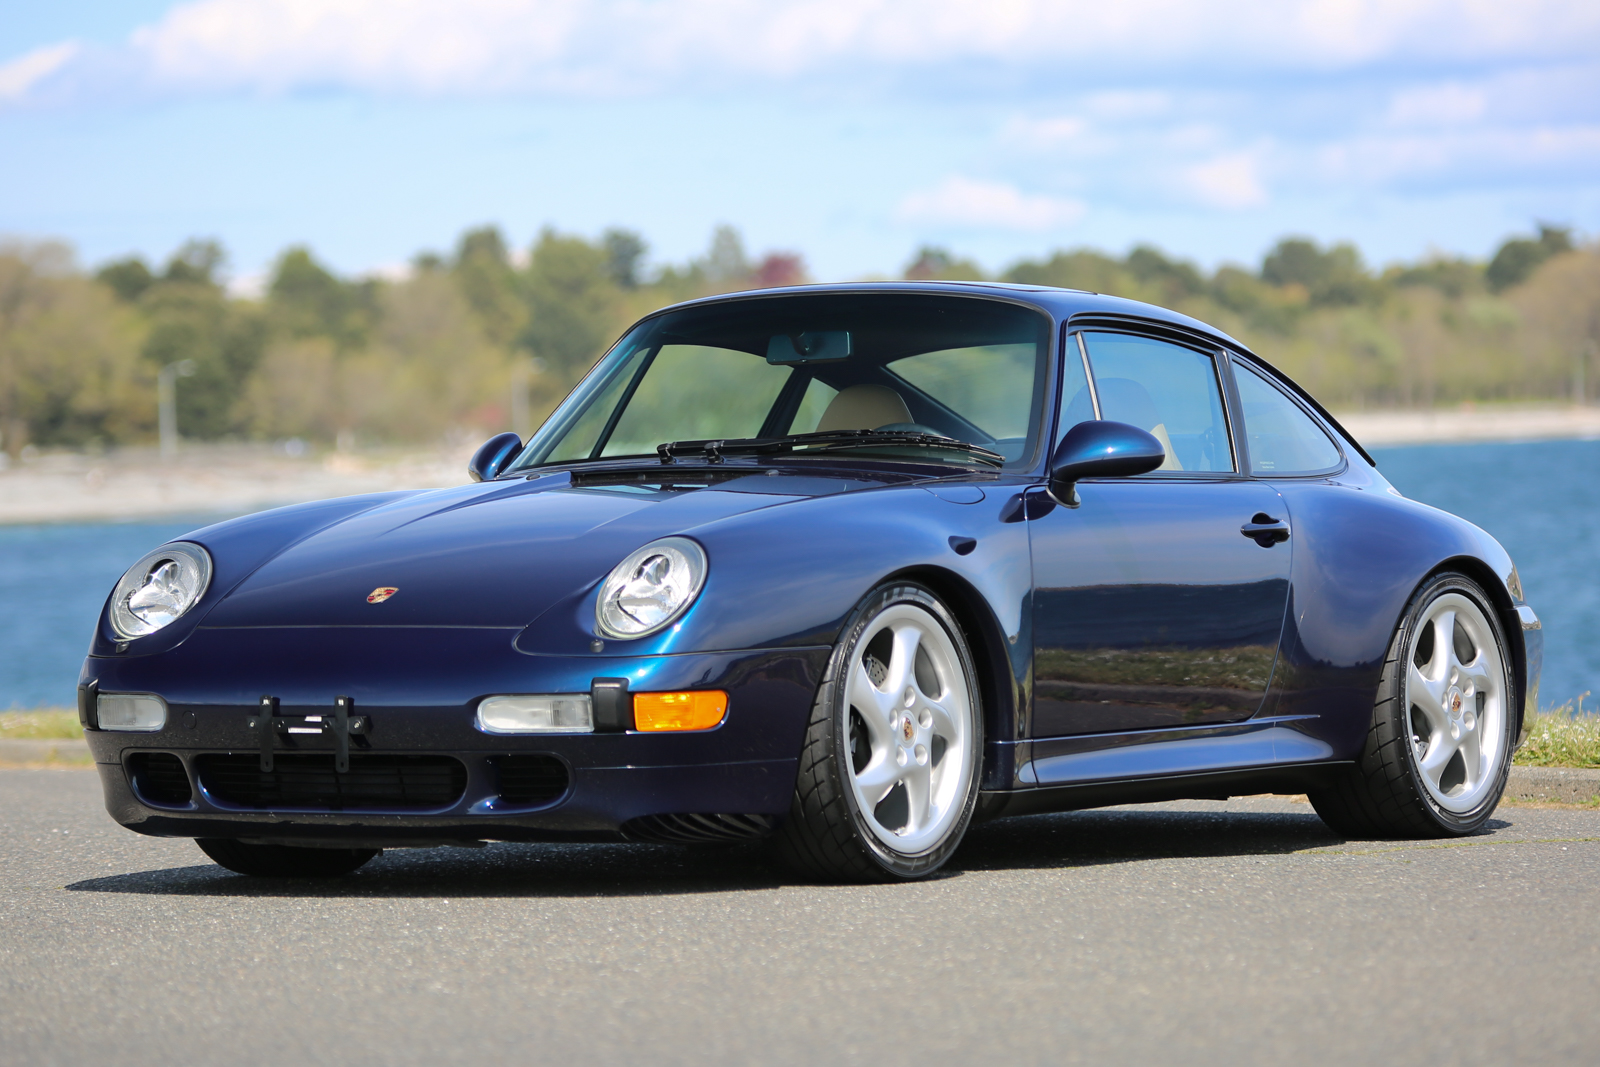 This Porsche 911 Turbo S Has Traveled Distances And It's Now For Sale